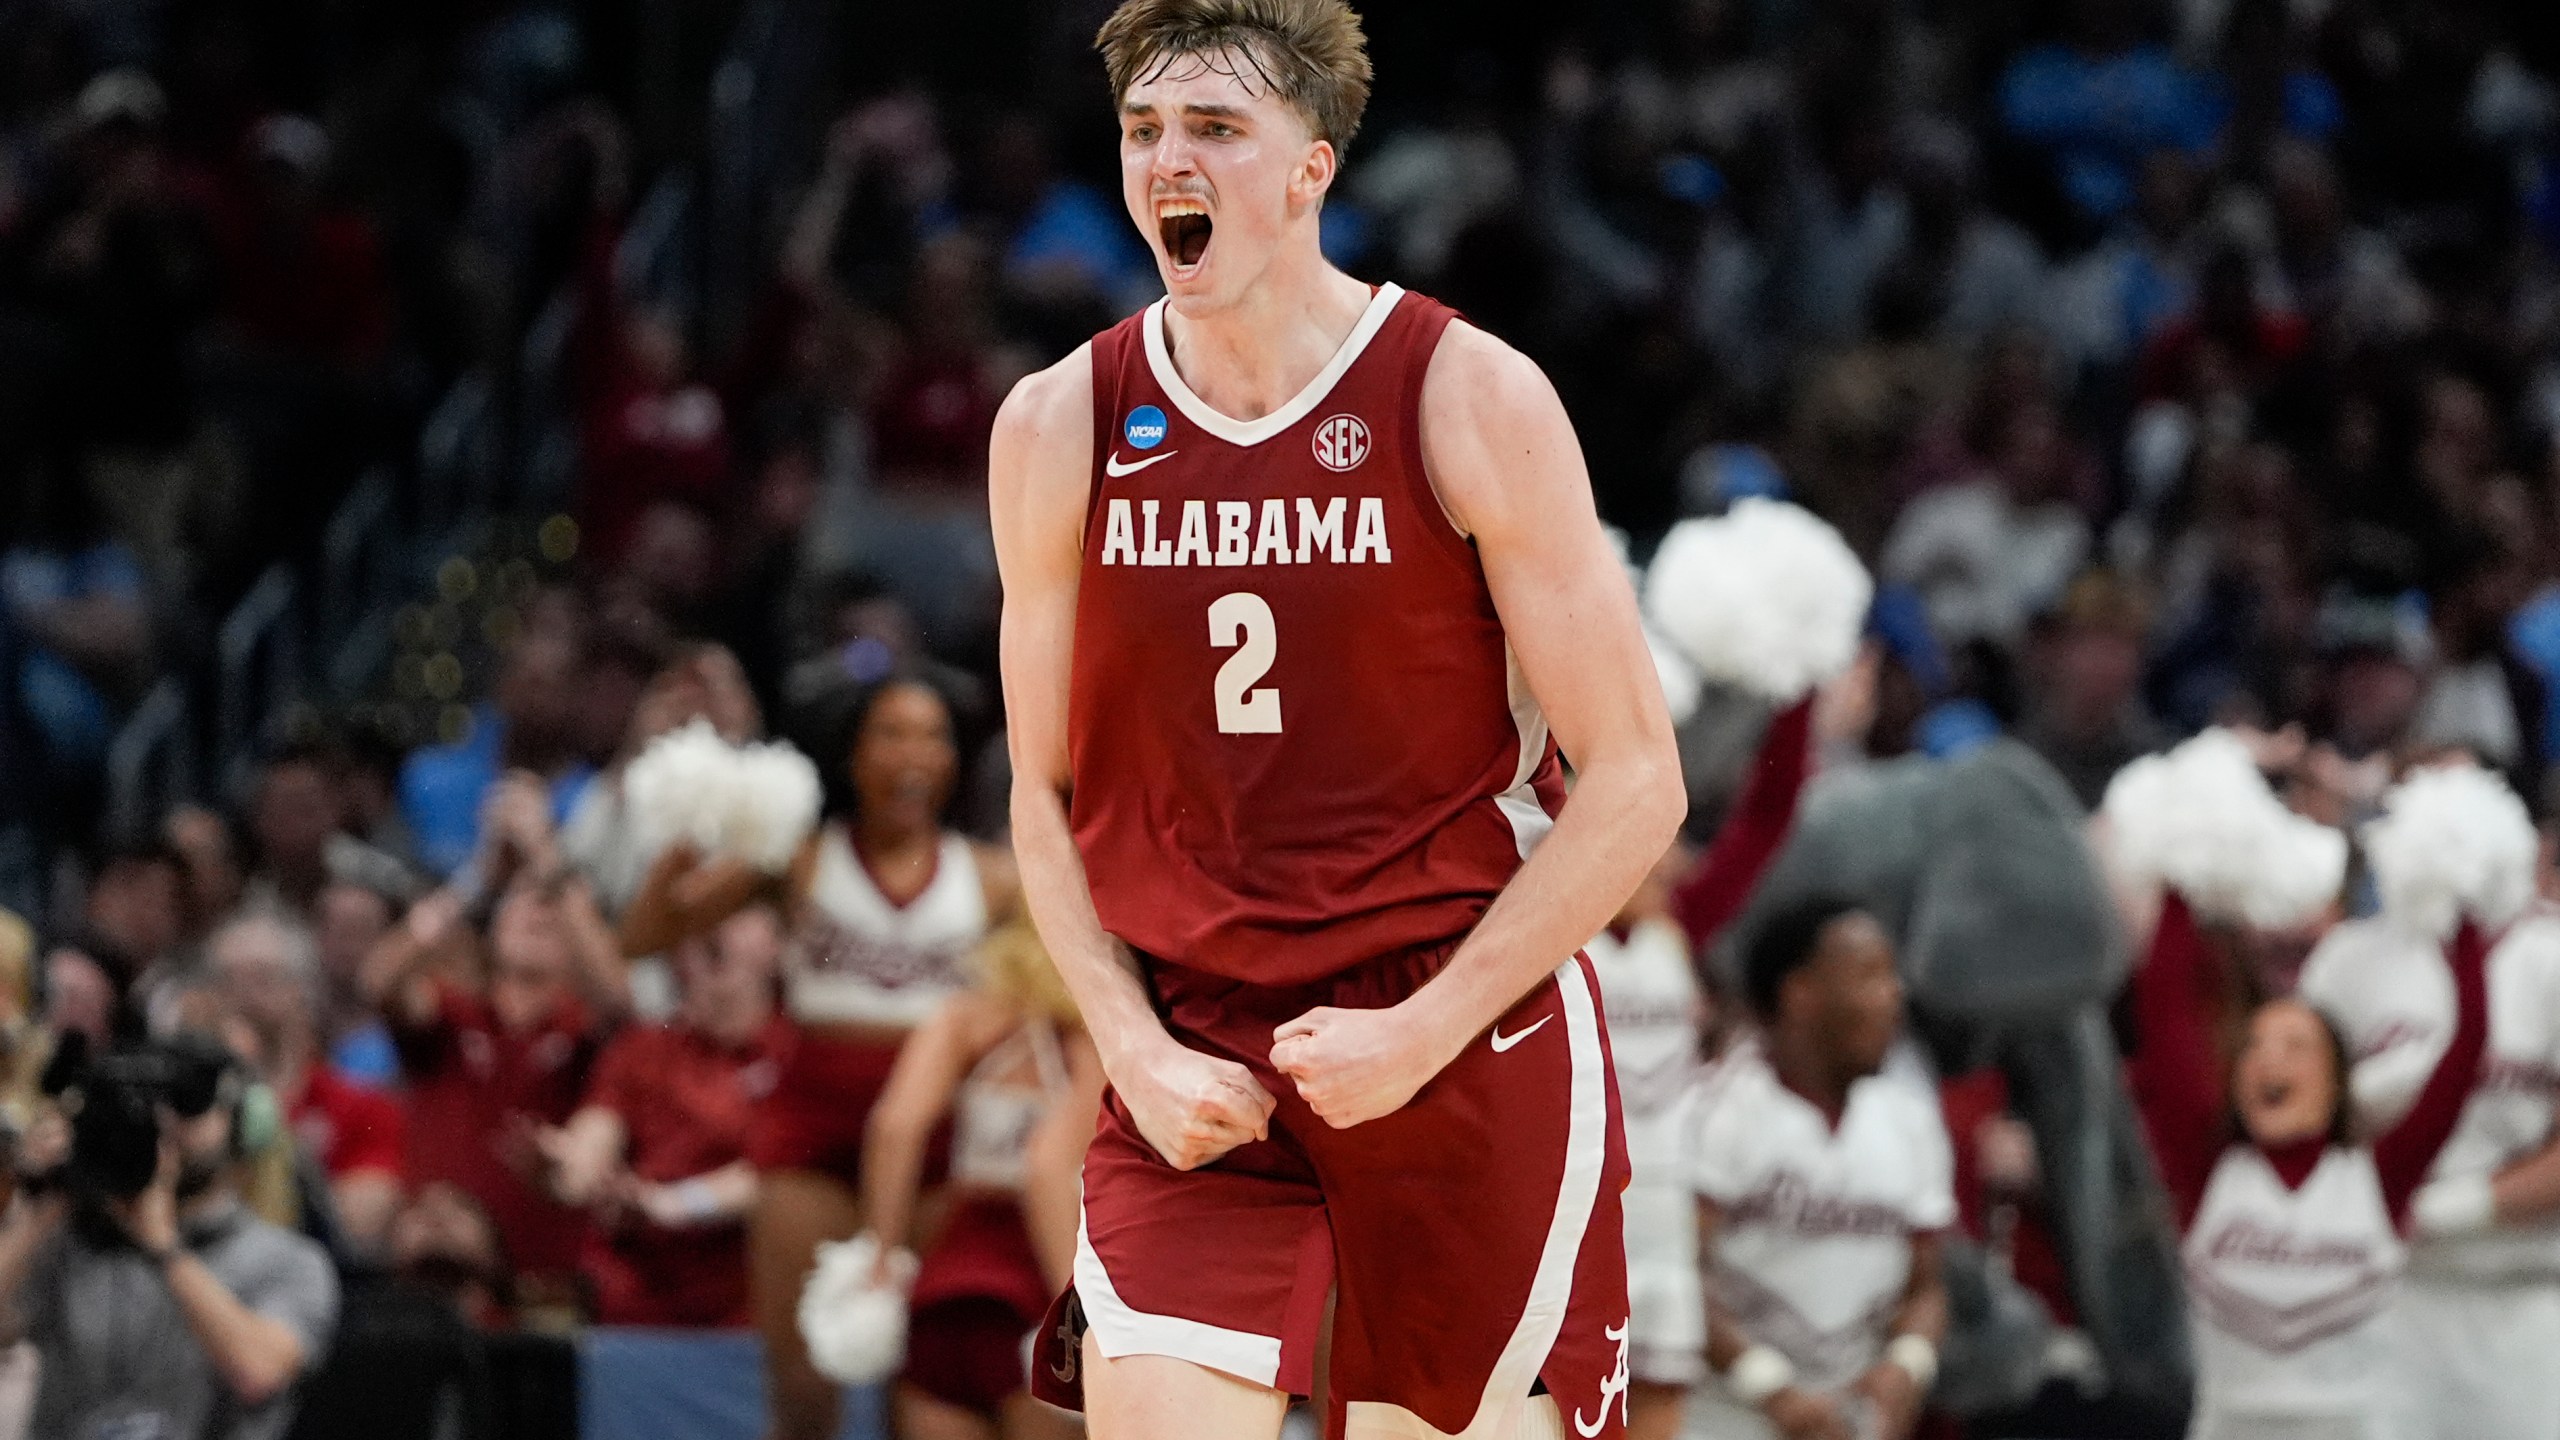 Alabama forward Grant Nelson (2) celebrates after scoring during the second half of a Sweet 16 college basketball game against North Carolina in the NCAA tournament Thursday, March 28, 2024, in Los Angeles. (AP Photo/Ryan Sun)